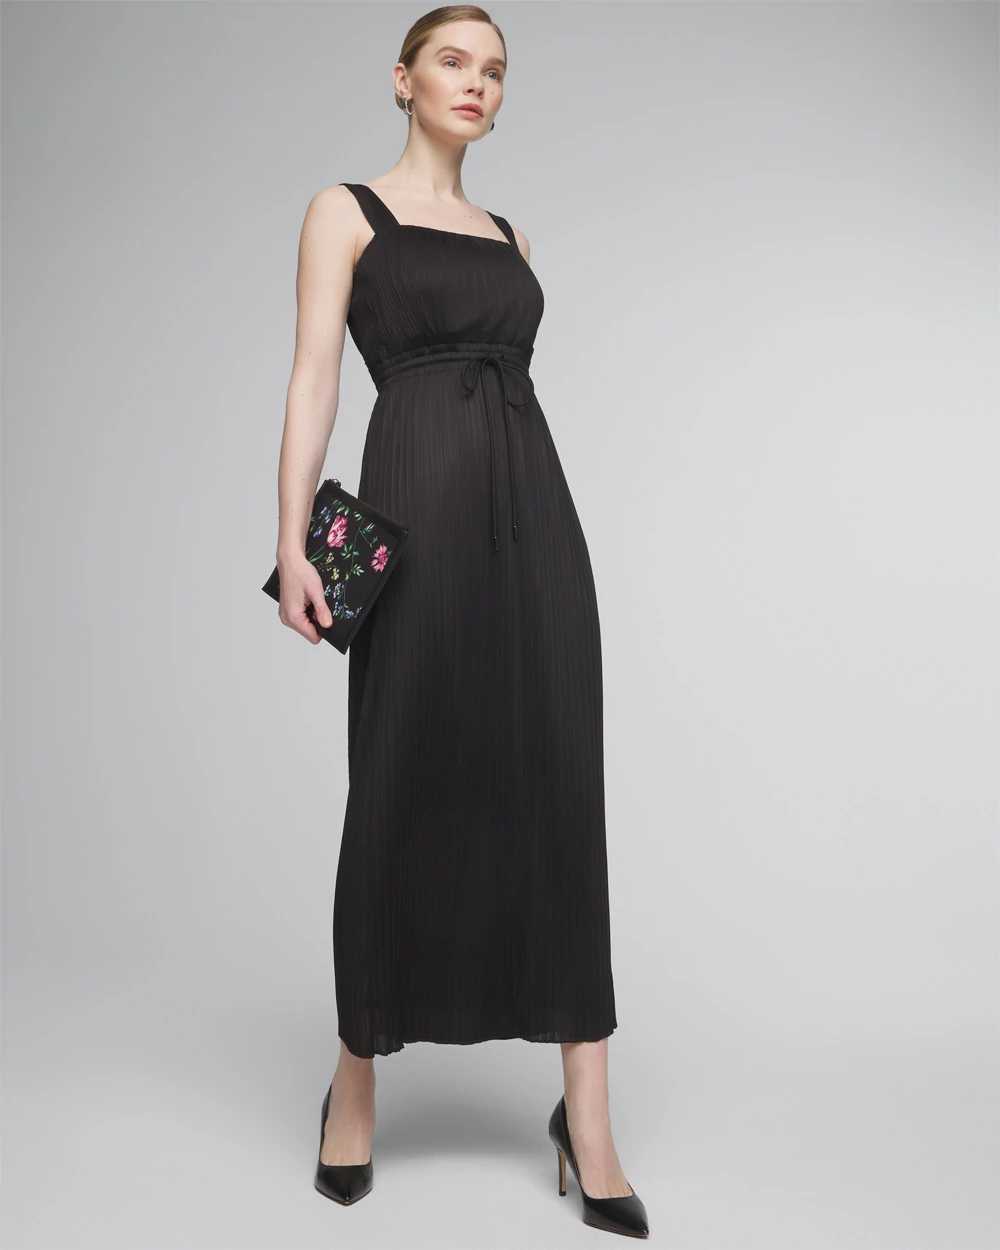 Sleeveless Tie-Waist Pleated Midi Dress click to view larger image.